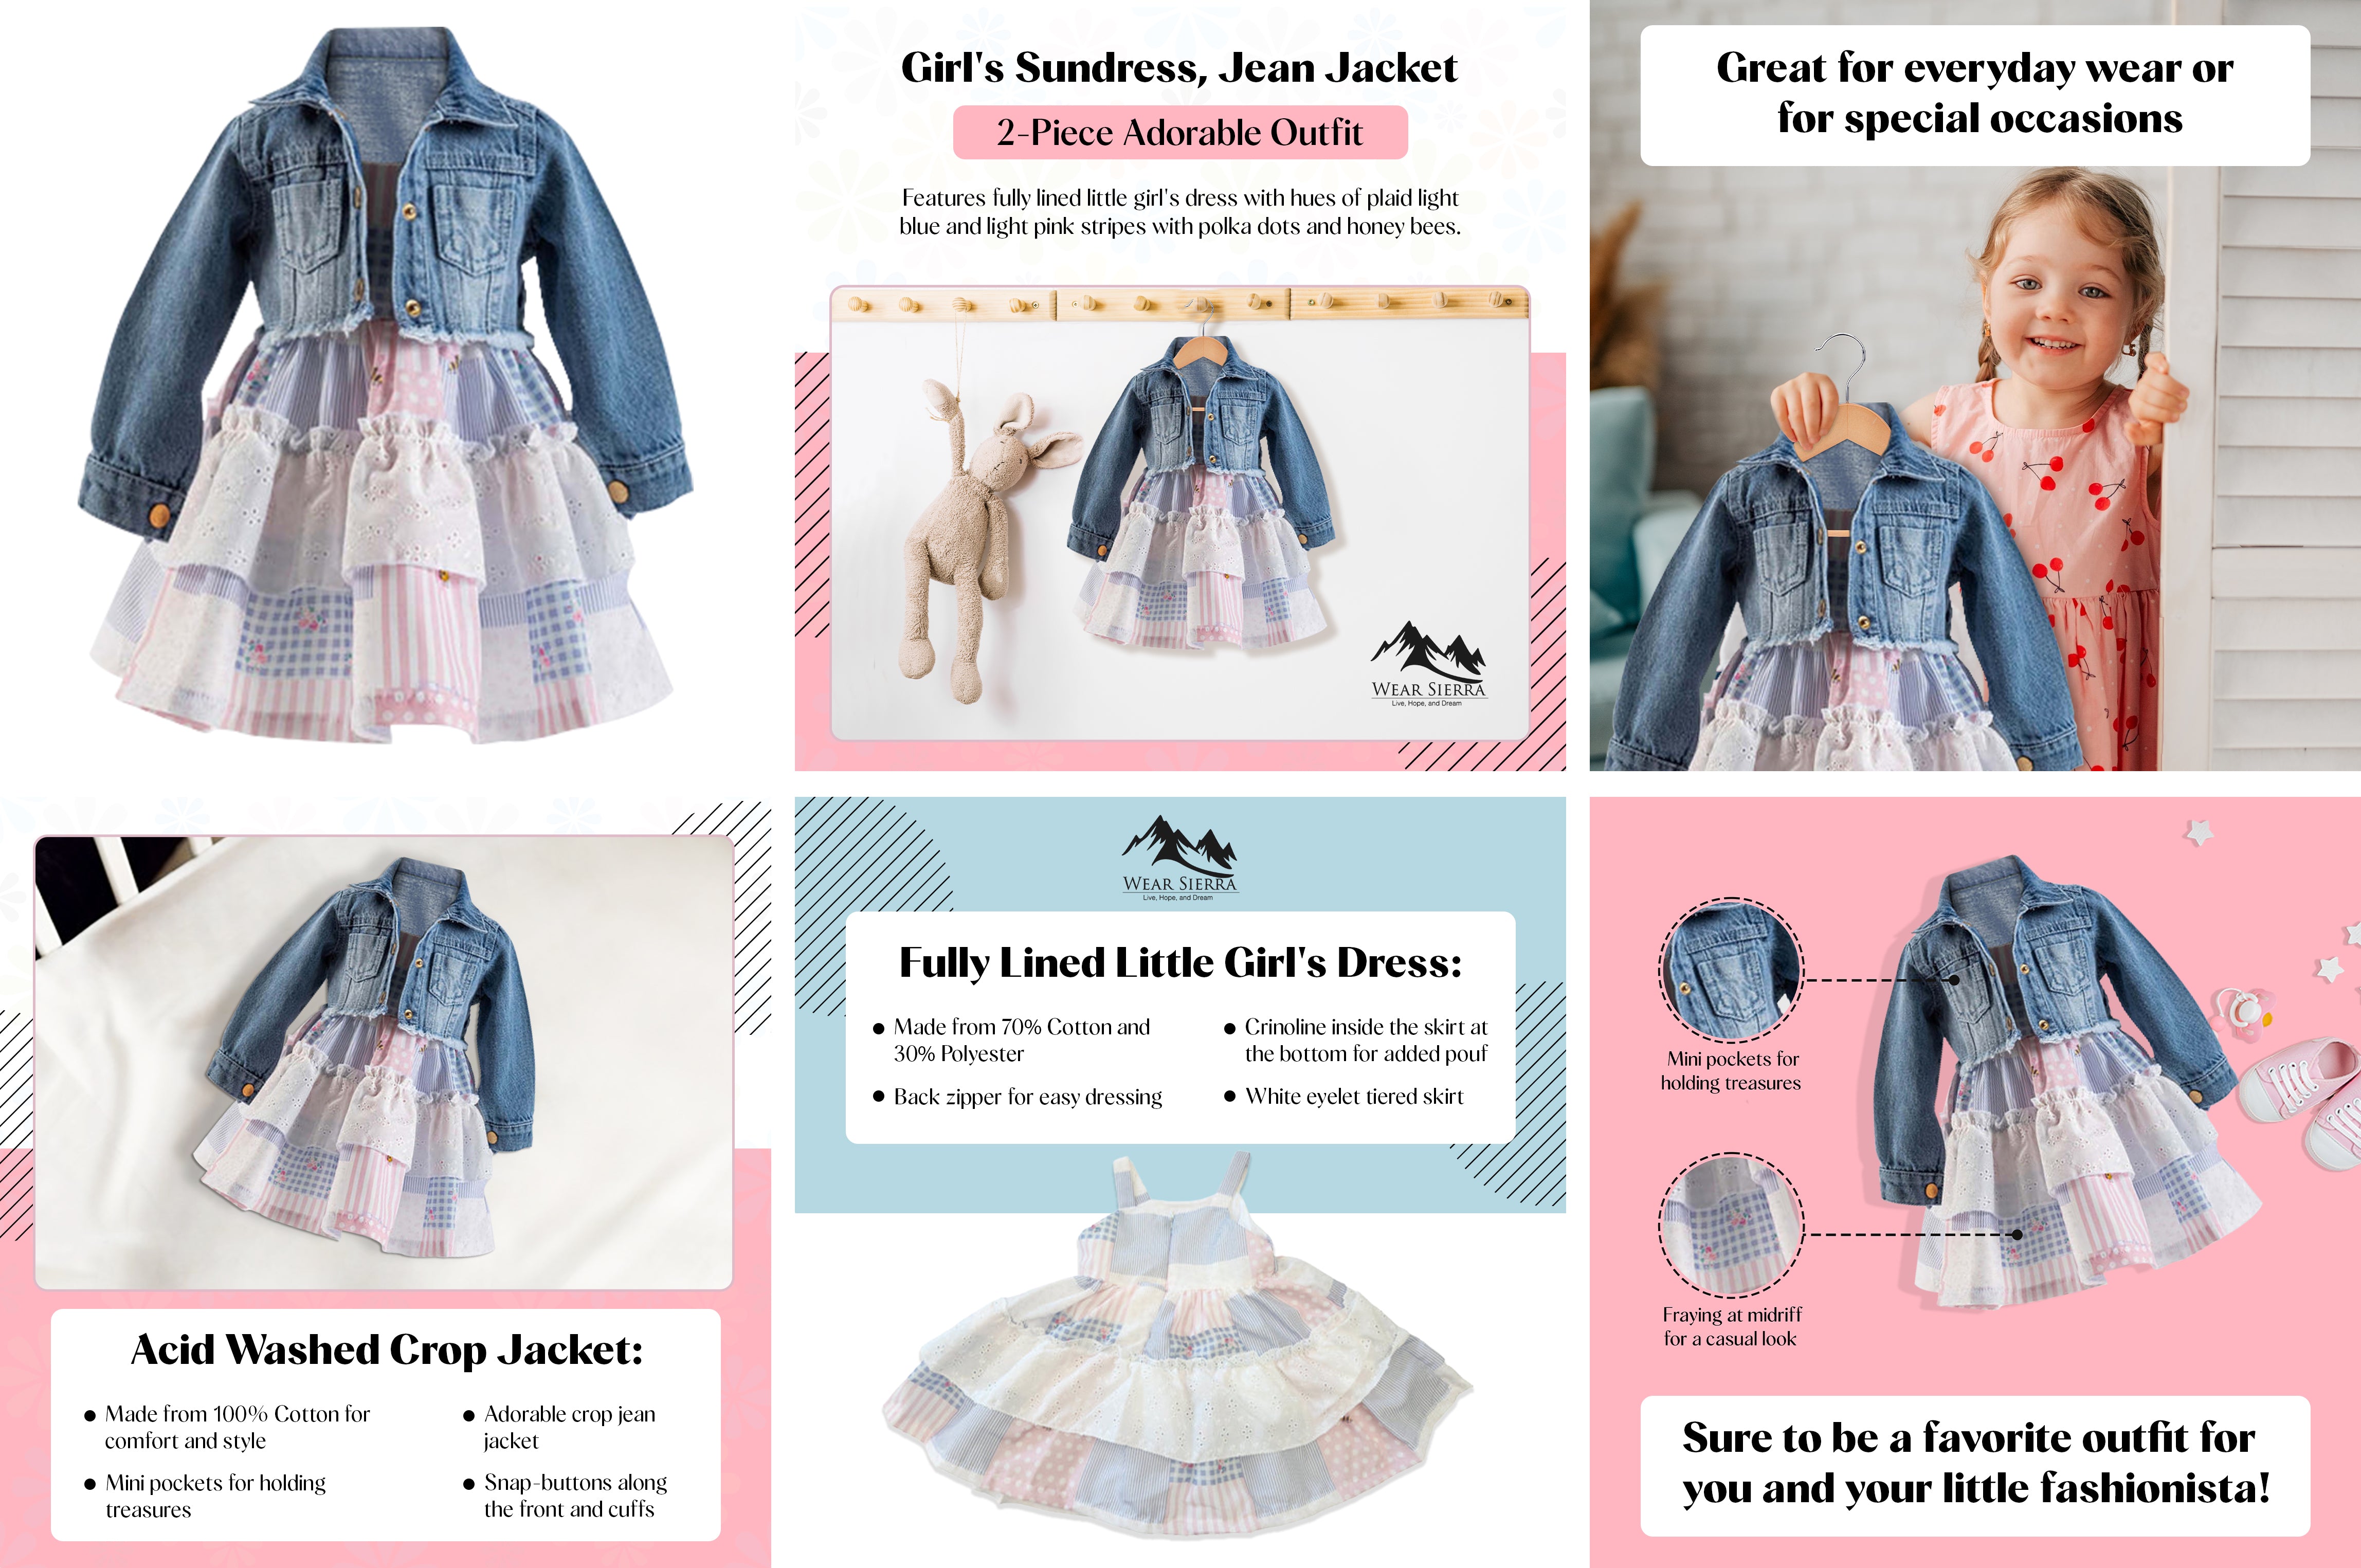 Infant and Toddler Girl's Sundress and Crop Jean Jacket 2-Piece Adorable Outfit